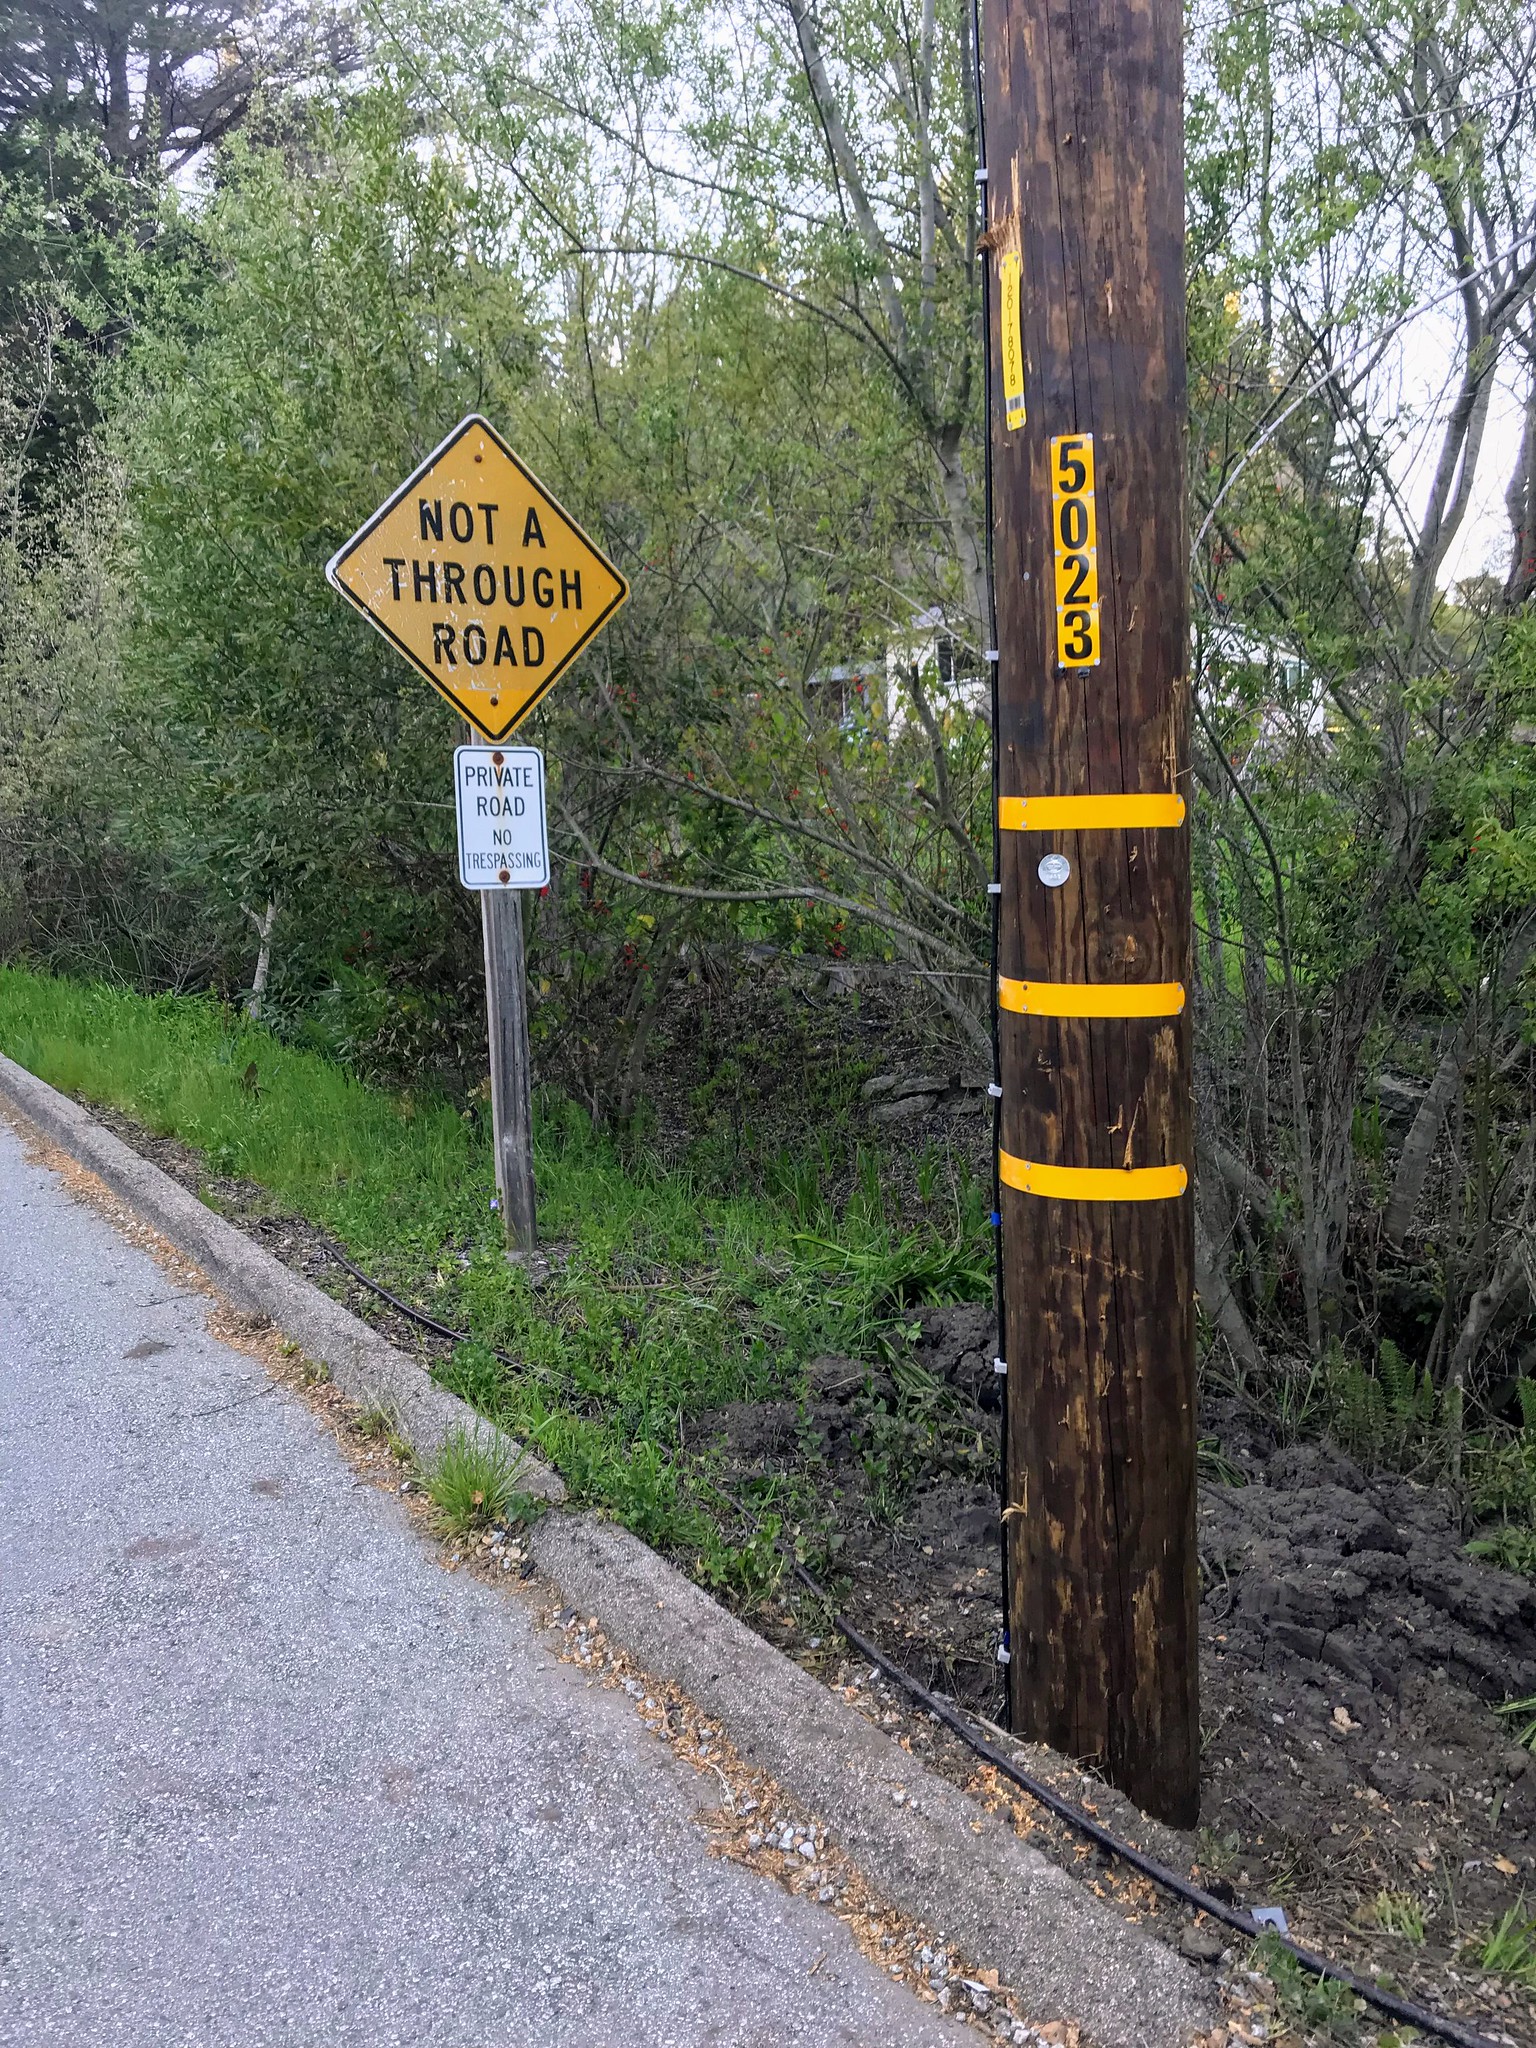 The pole is close to the road sign